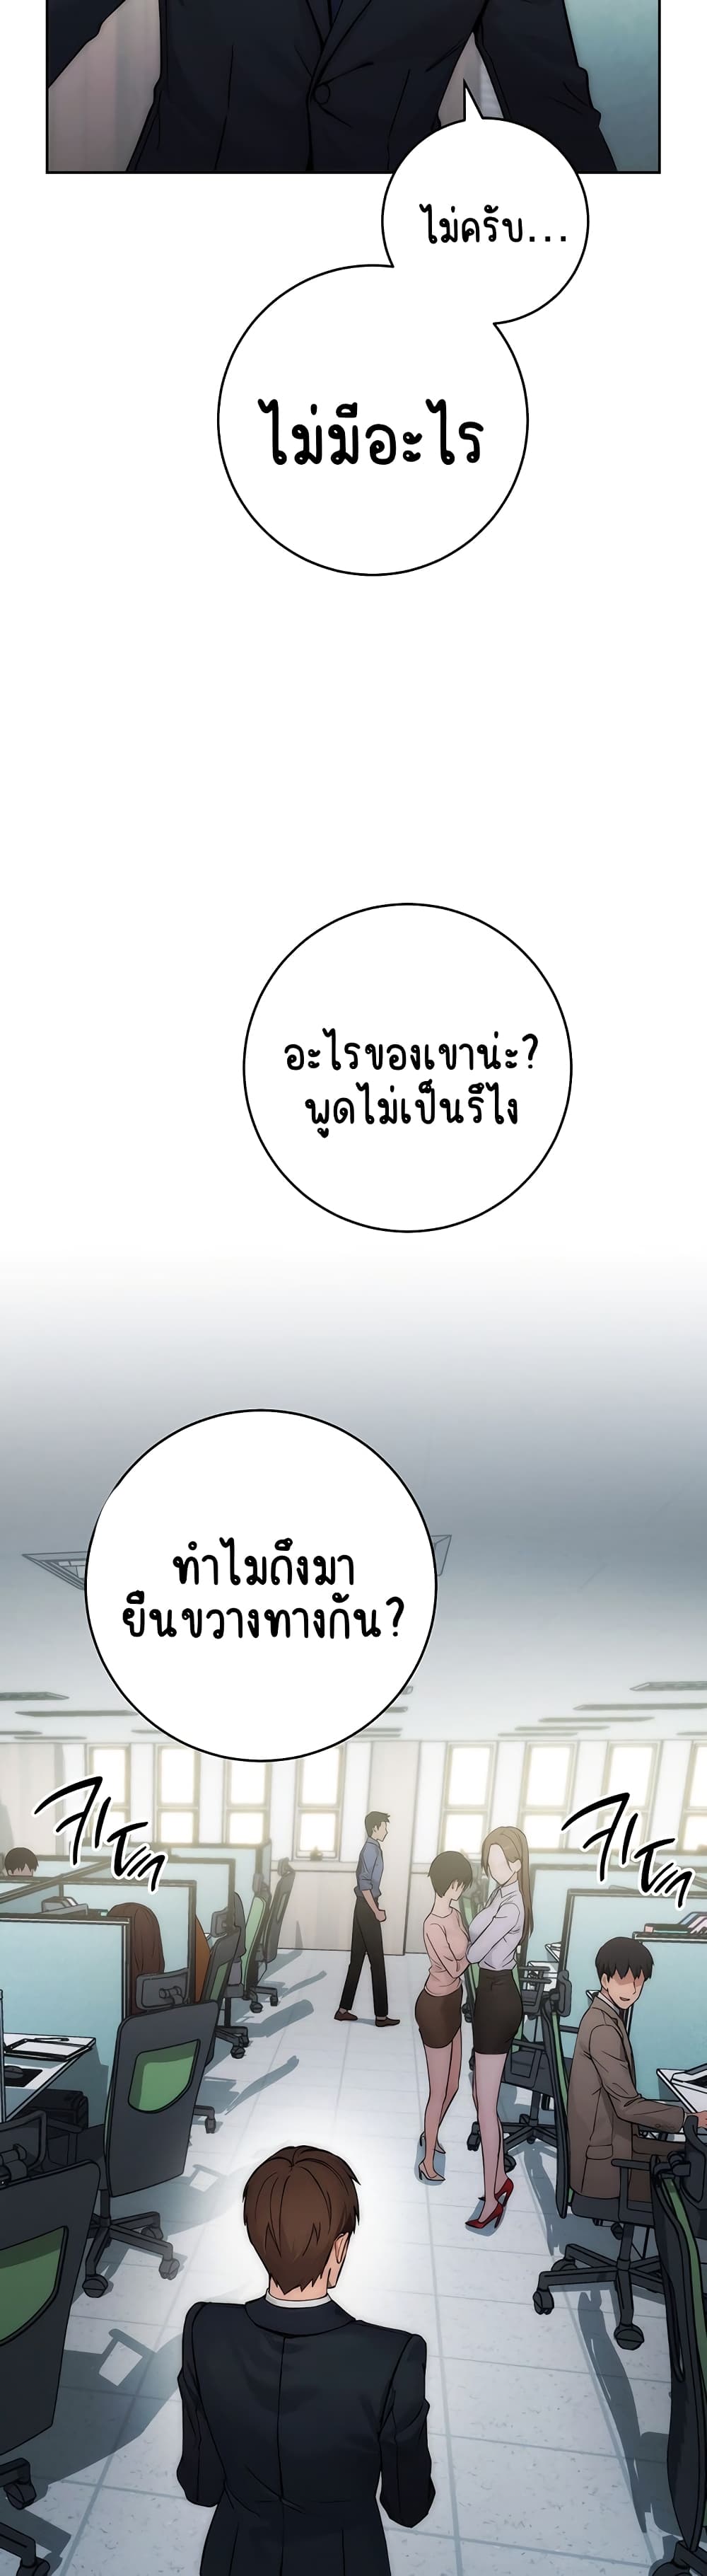 Outsider: The Invisible Man ตอนที่ 1 ภาพ 8